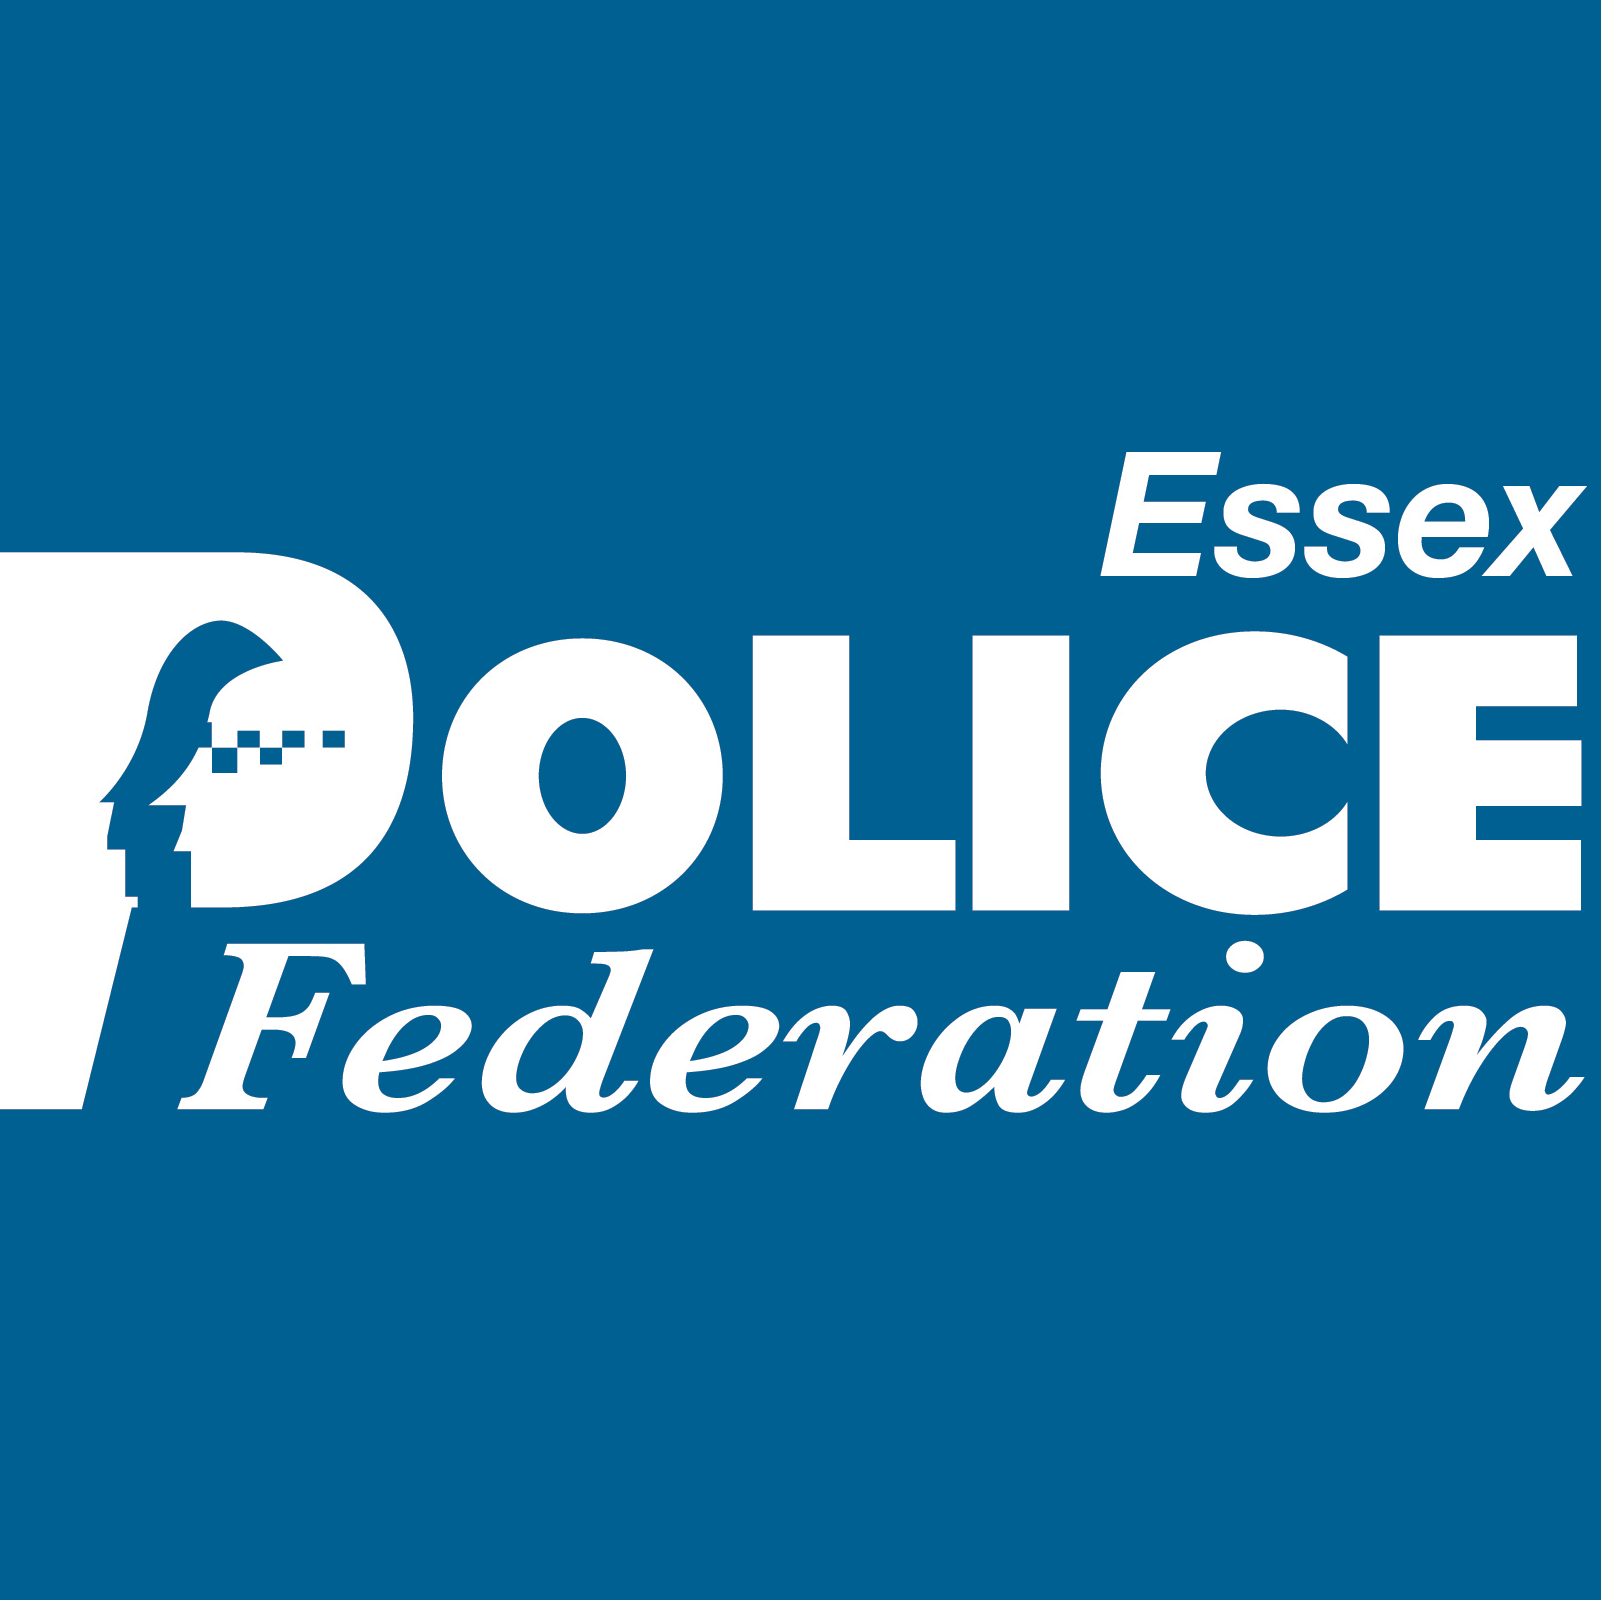 Essex Police Federation, representing all Constables, Sergeants, Inspectors and Chief Inspectors in Essex.